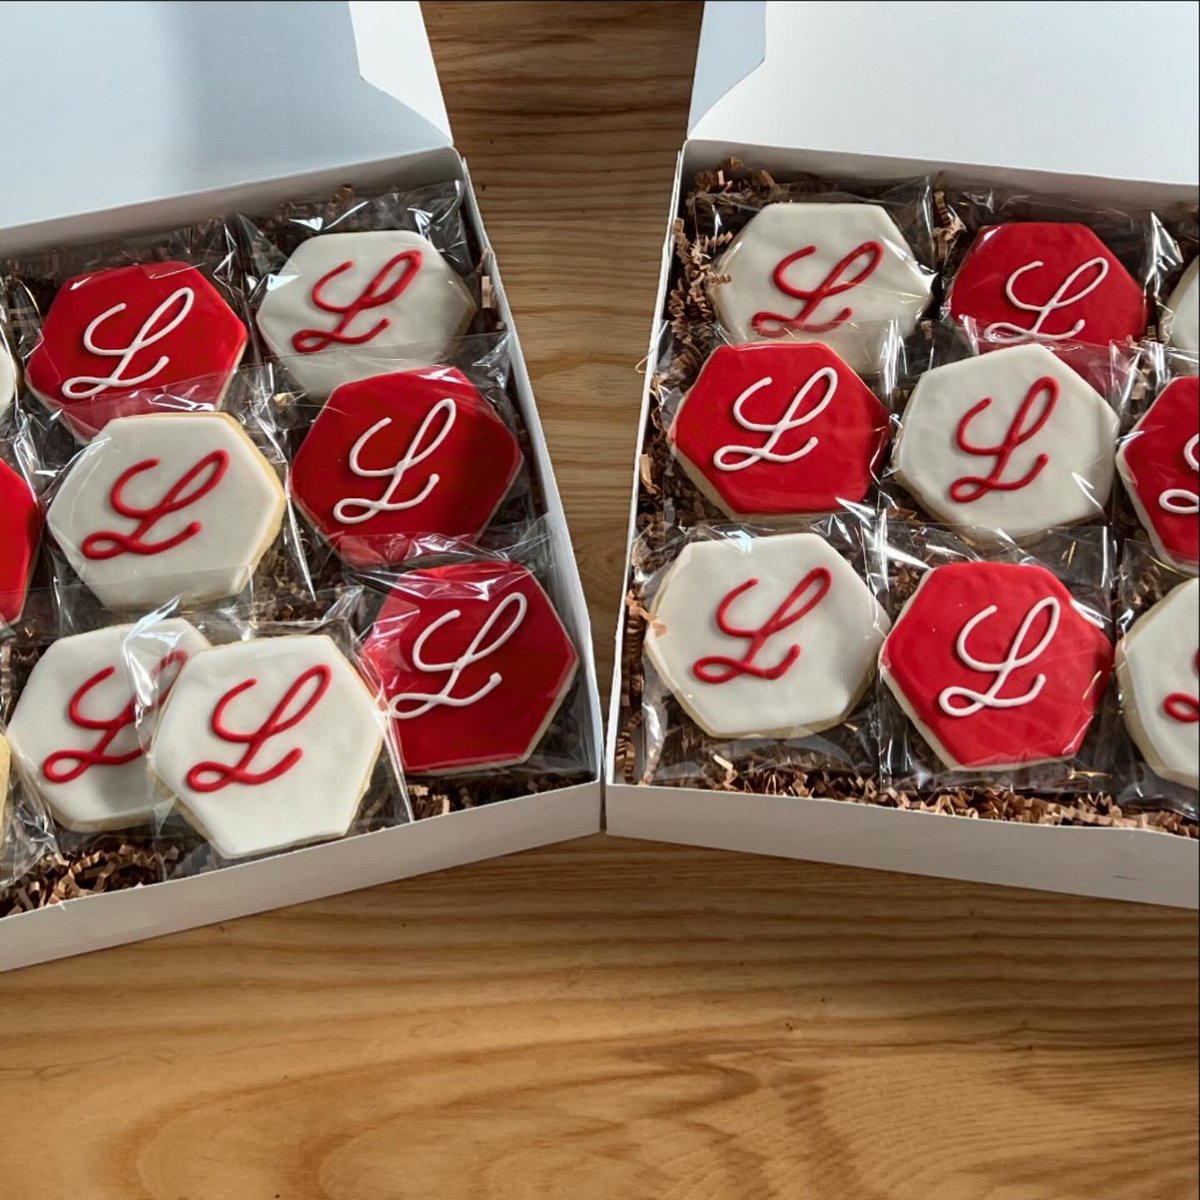 Your business looking for #logo sugar #cookies? We can handle any size order of your beloved #branding to add to your next event! Let’s chat! Carascookieco.com